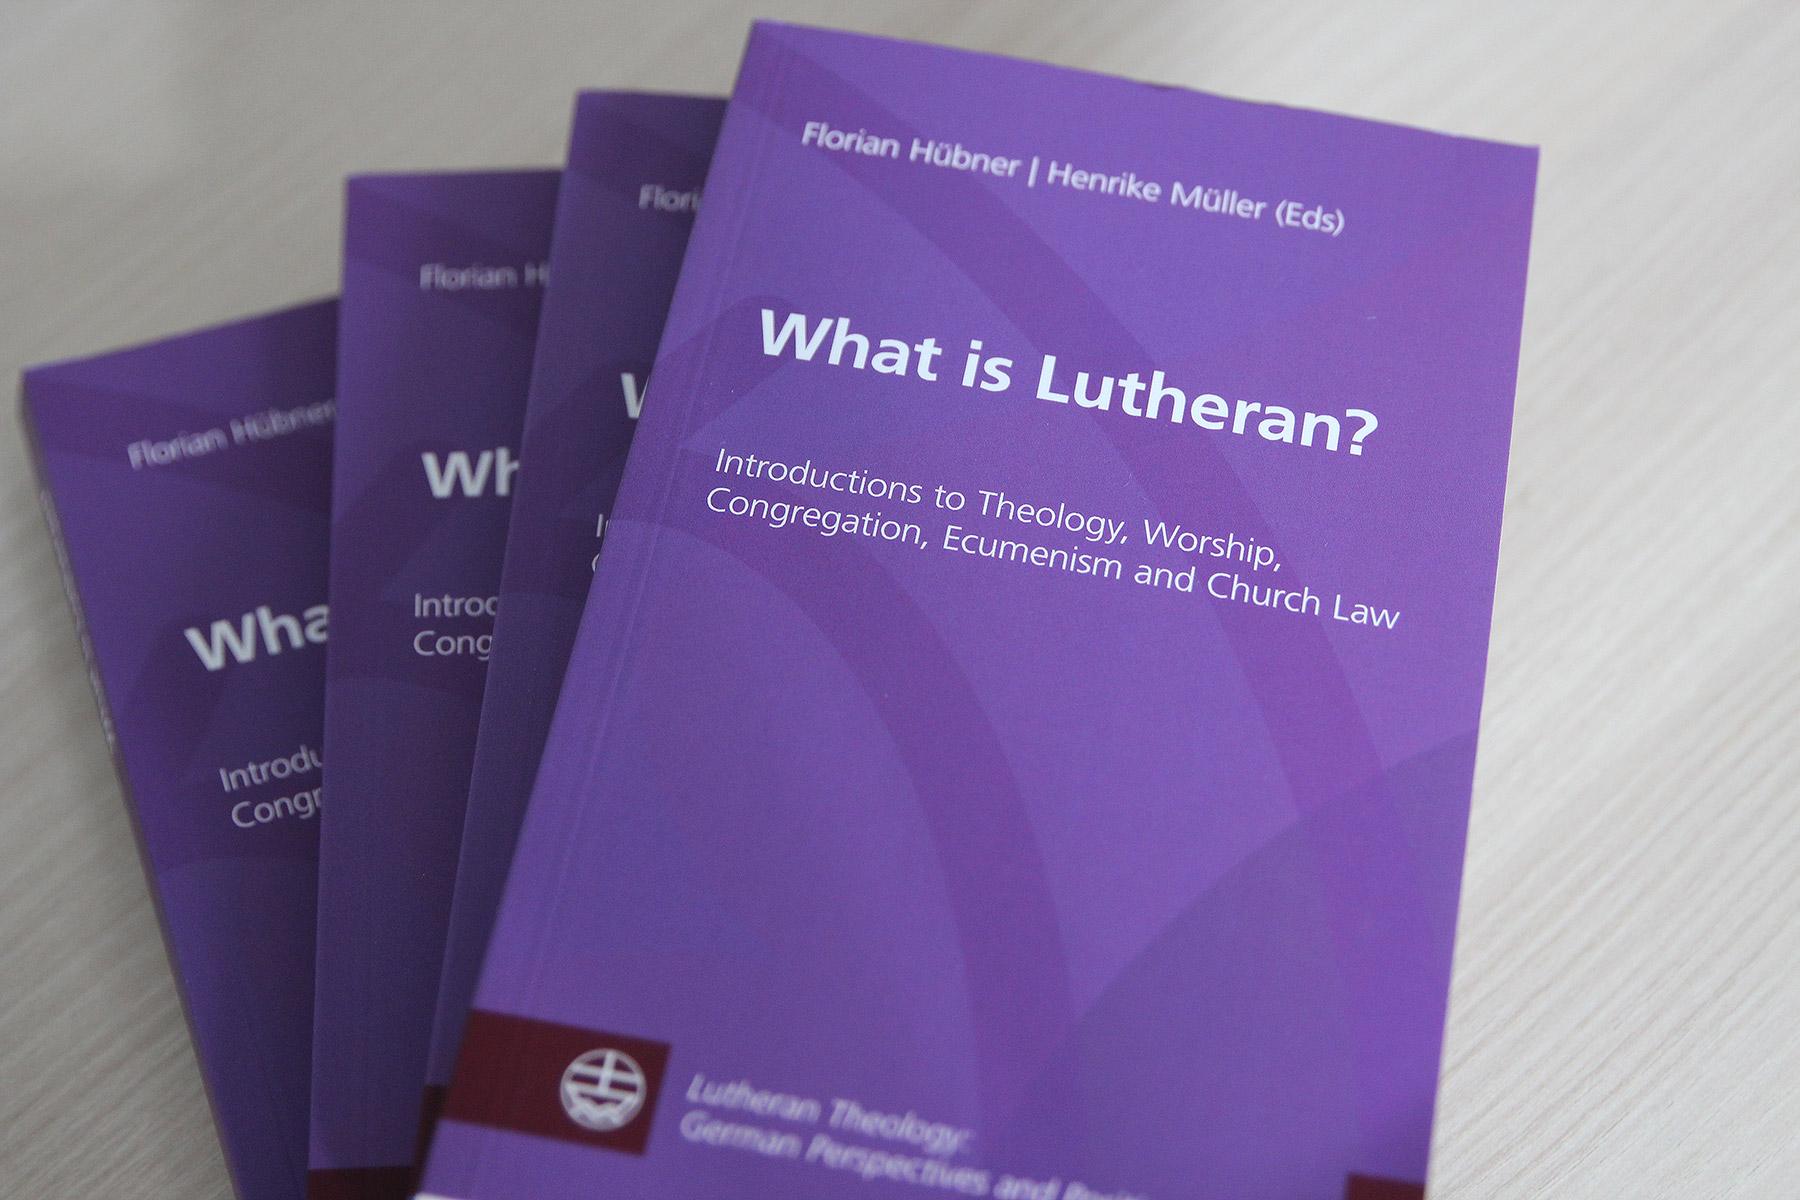 A new publication features German perspectives on Lutheran theology. Photo: LWF/A. WeyermÃ¼ller